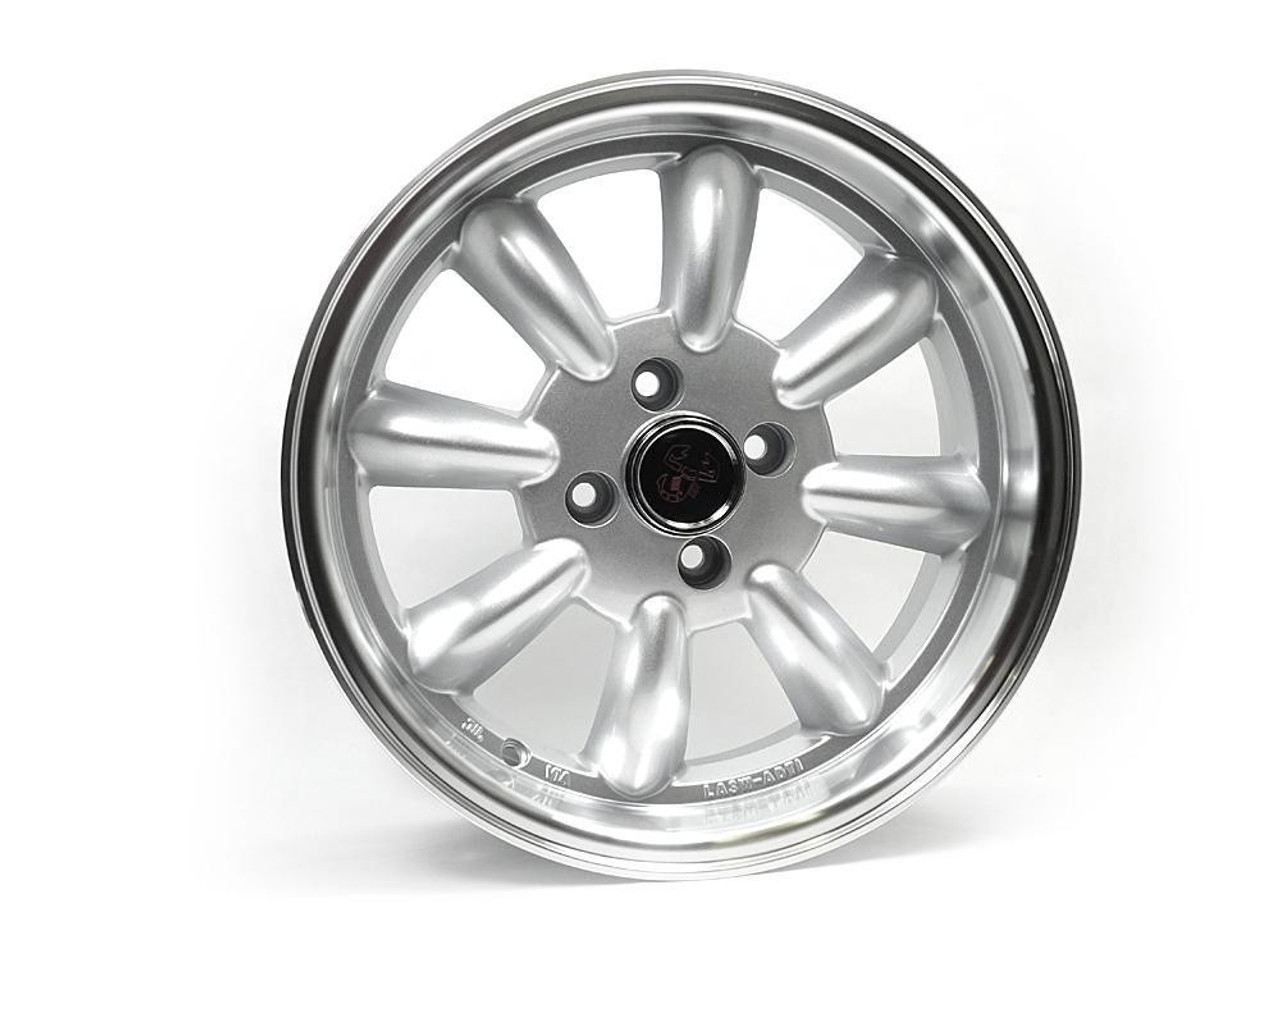 Monza wheels 15" x 6.5", 15mm offset - Auto Ricambi
Silver
Competizione Sport Tuning Monza wheels 15" x 6.5", 15mm offset
FIAT 124 Spider, Sport Coupe, Spider 2000 and Pininfarina - 1966-1985
FIAT 500 - 2012-2019 2 door models